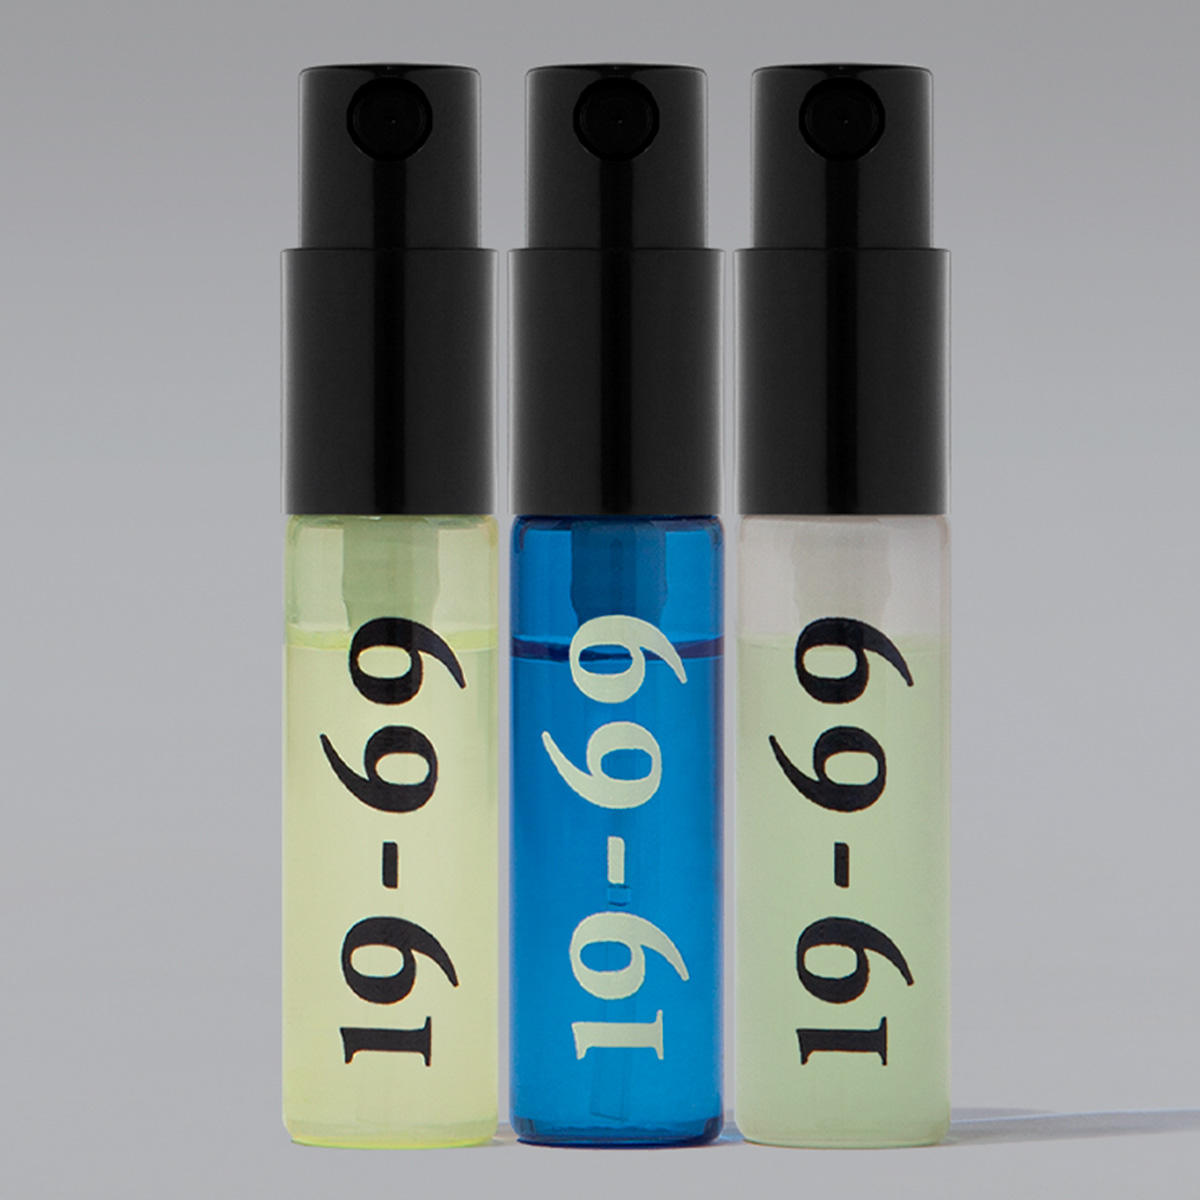 19-69 The Collection Two 3 x 2,5 ml - 2